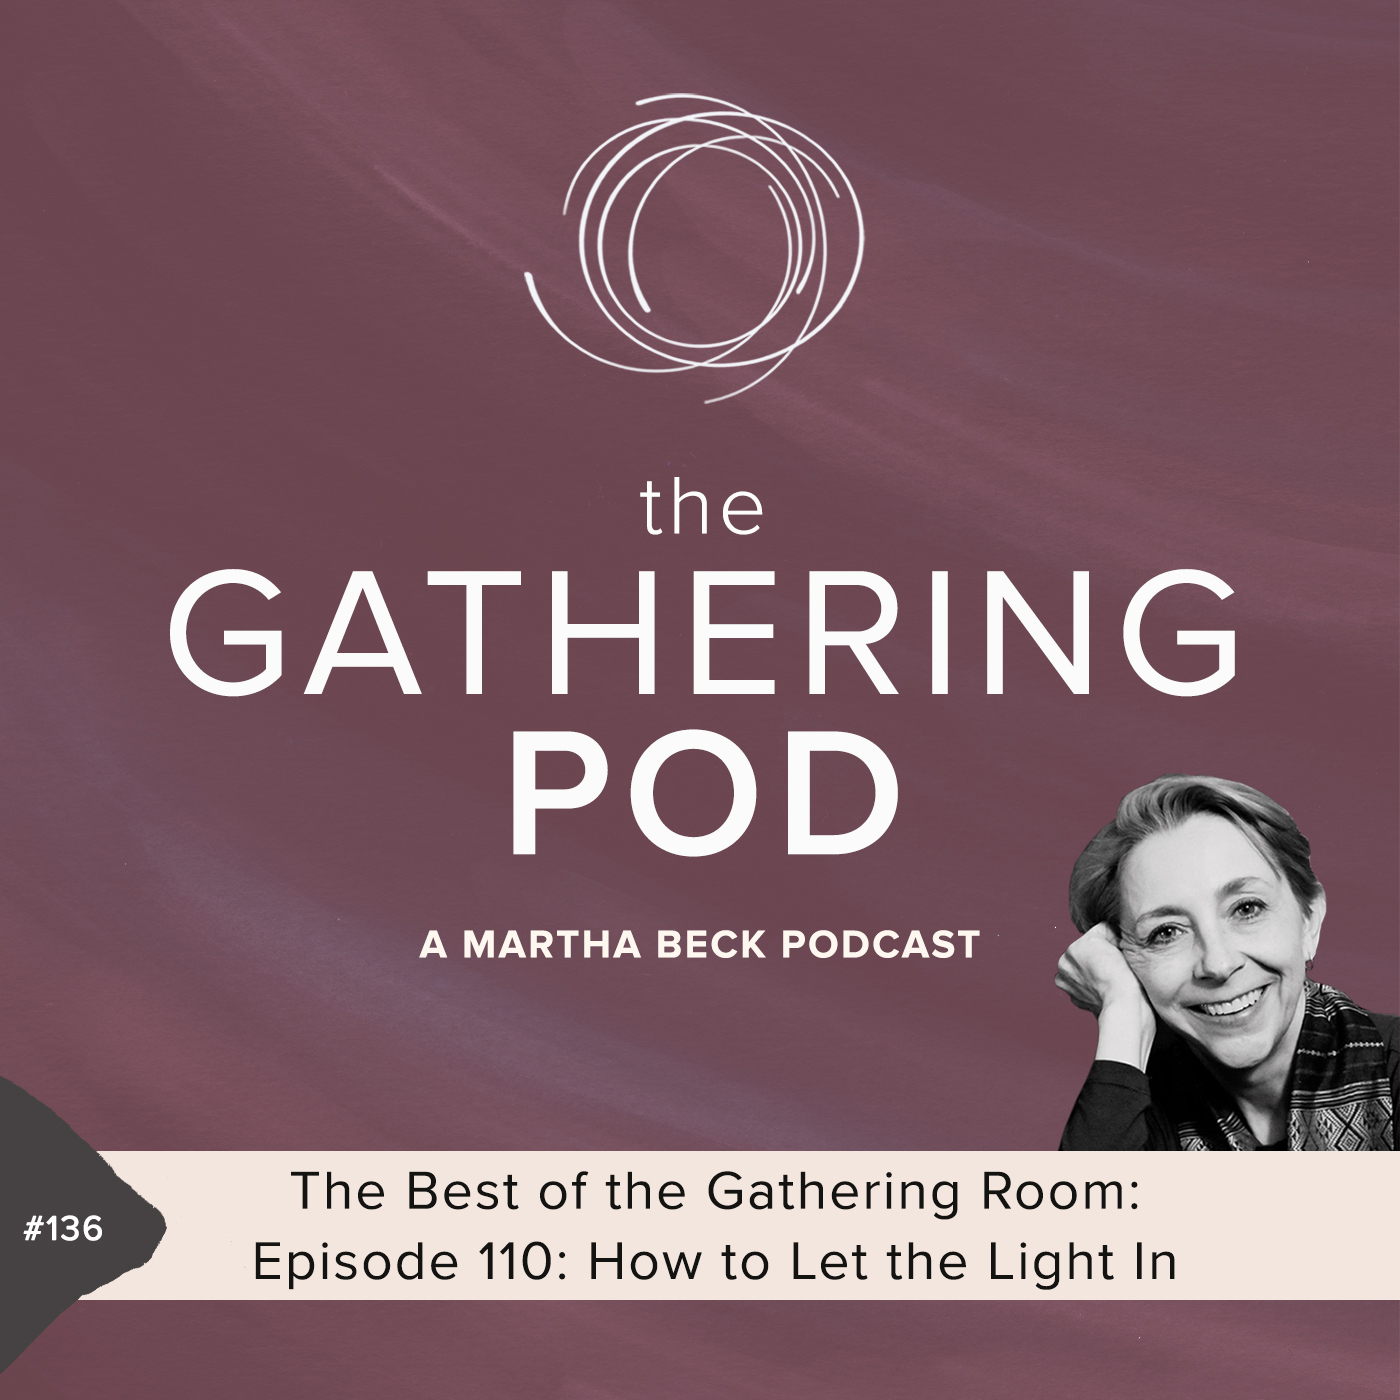 Image for The Gathering Pod A Martha Beck Podcast Episode #136 The Best of the Gathering Room – Episode 110: How to Let the Light In